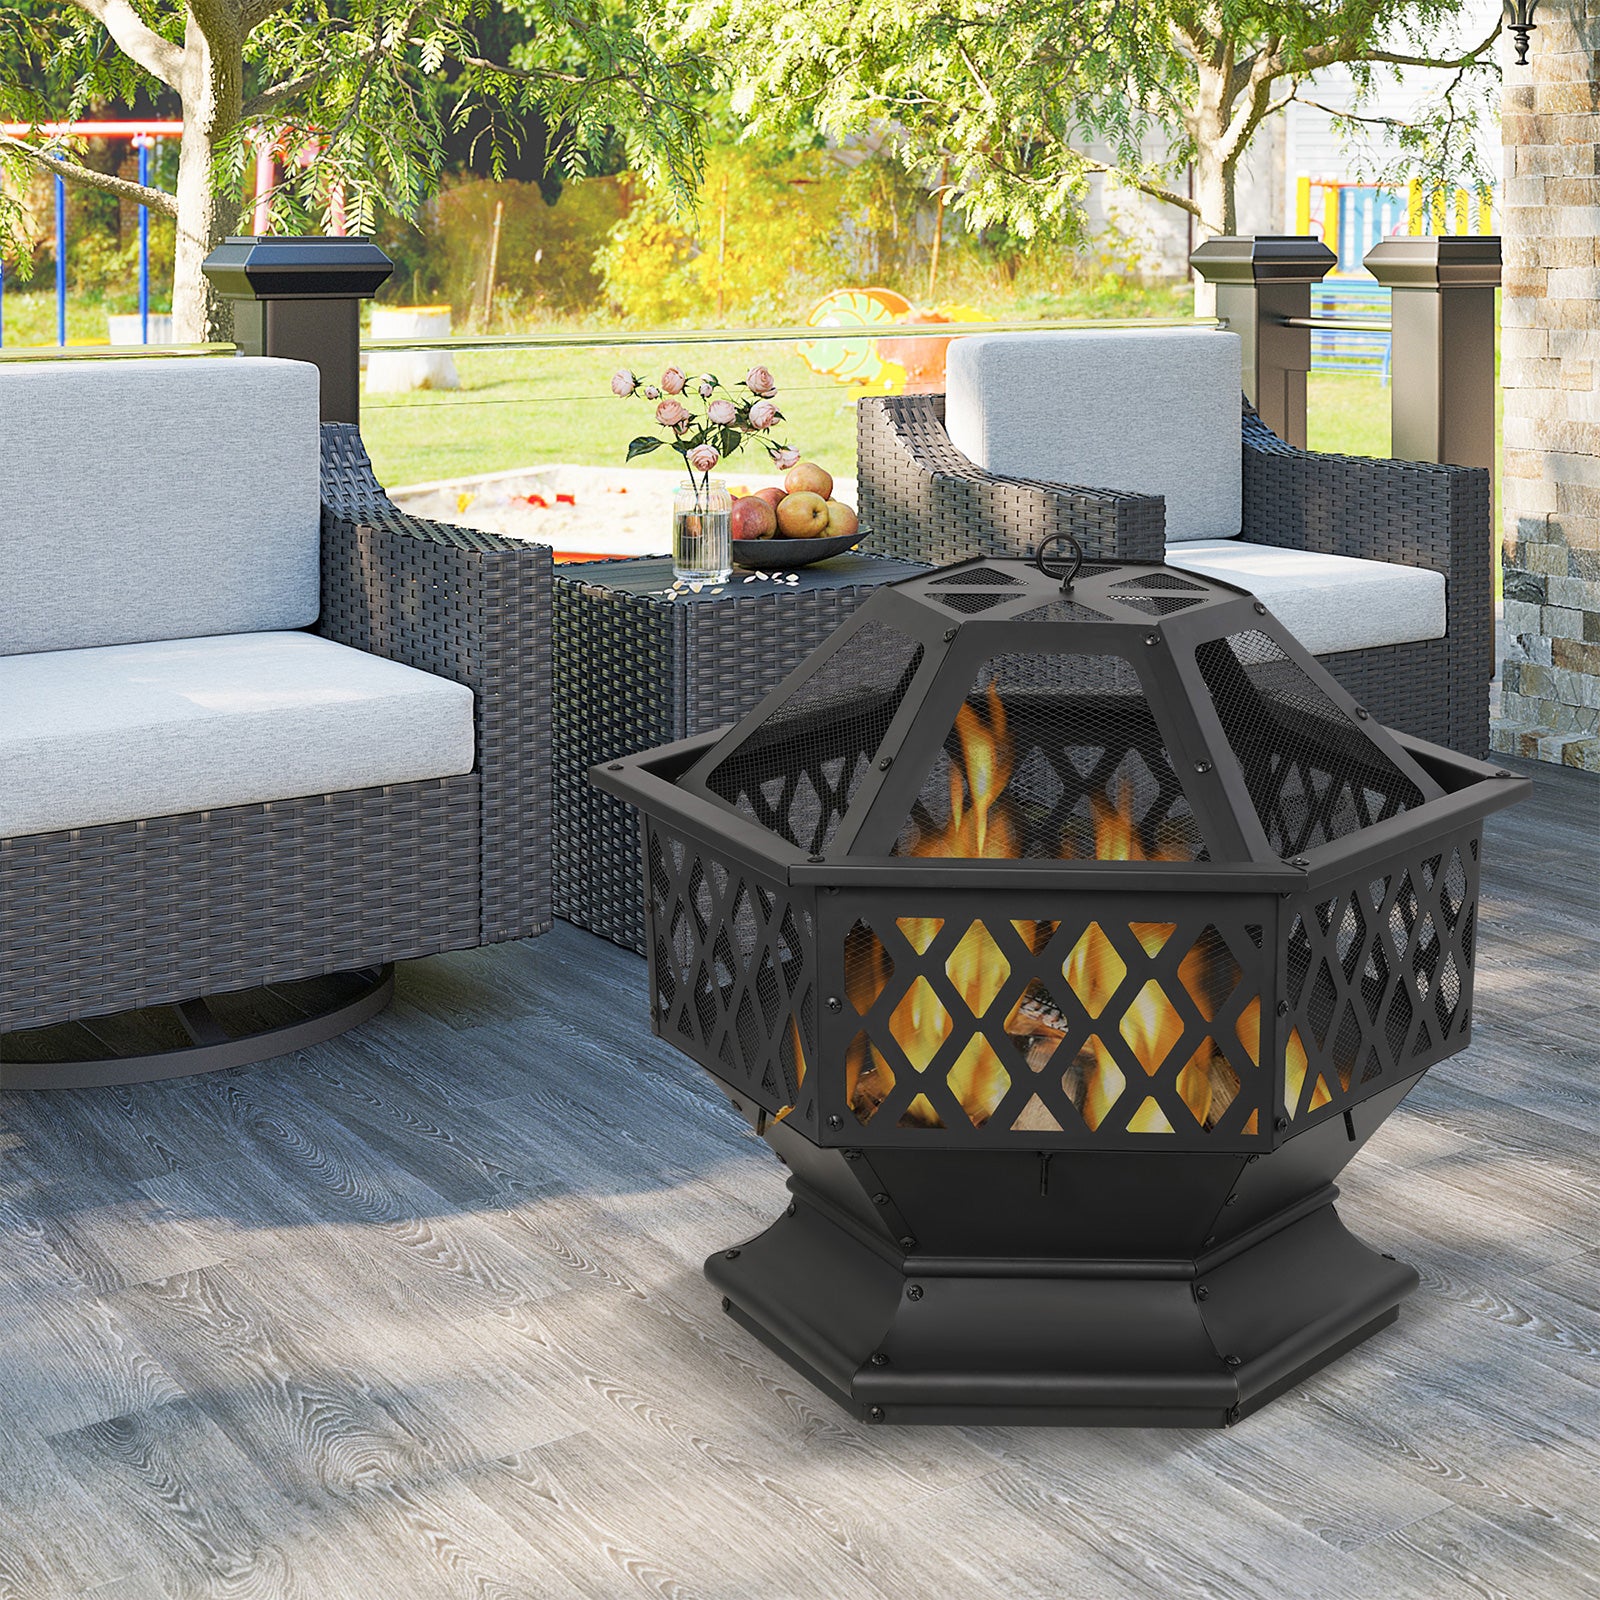 Hex Outdoor Wood Burning Fire Pit 27.6" Patio Fireplace with Spark Screen and Poker